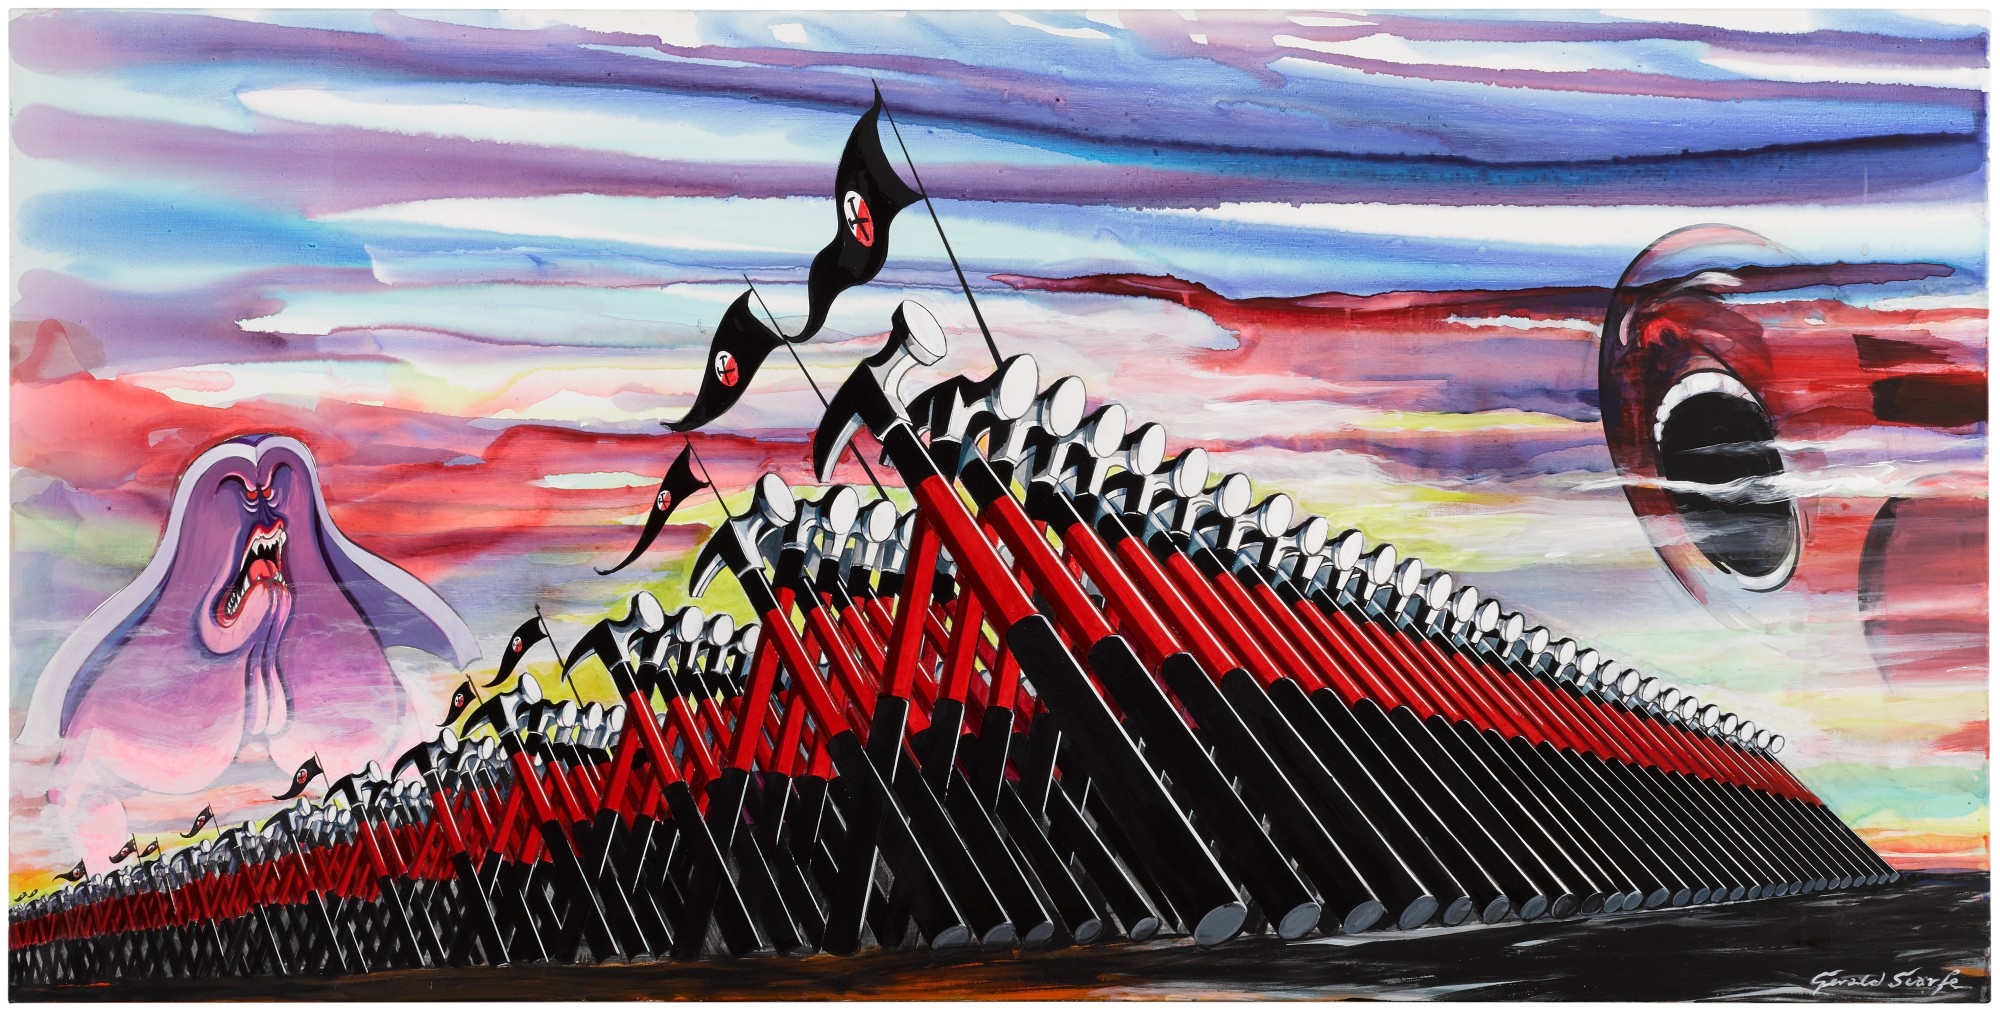 Marching Hammers and Screaming Head by Gerald Scarfe, Executed in 2022